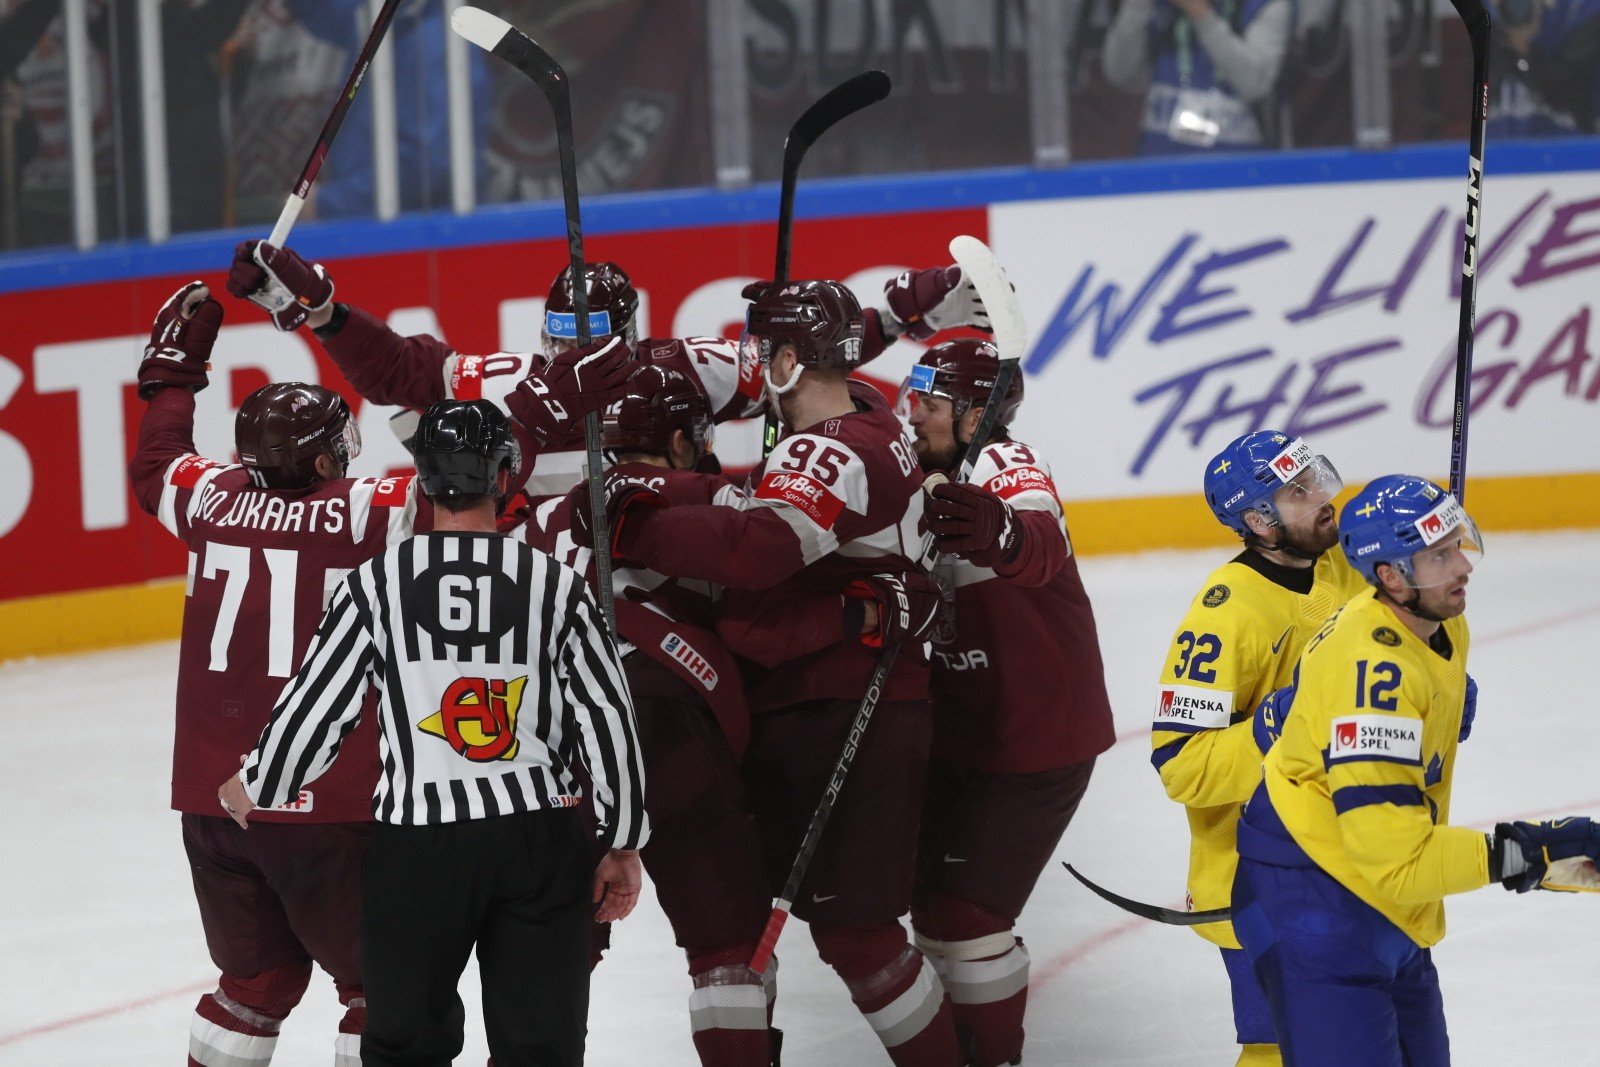 We all know the semi-finalists of the elite ice hockey world championship.  Canada and Latvia in the tournament’s top four